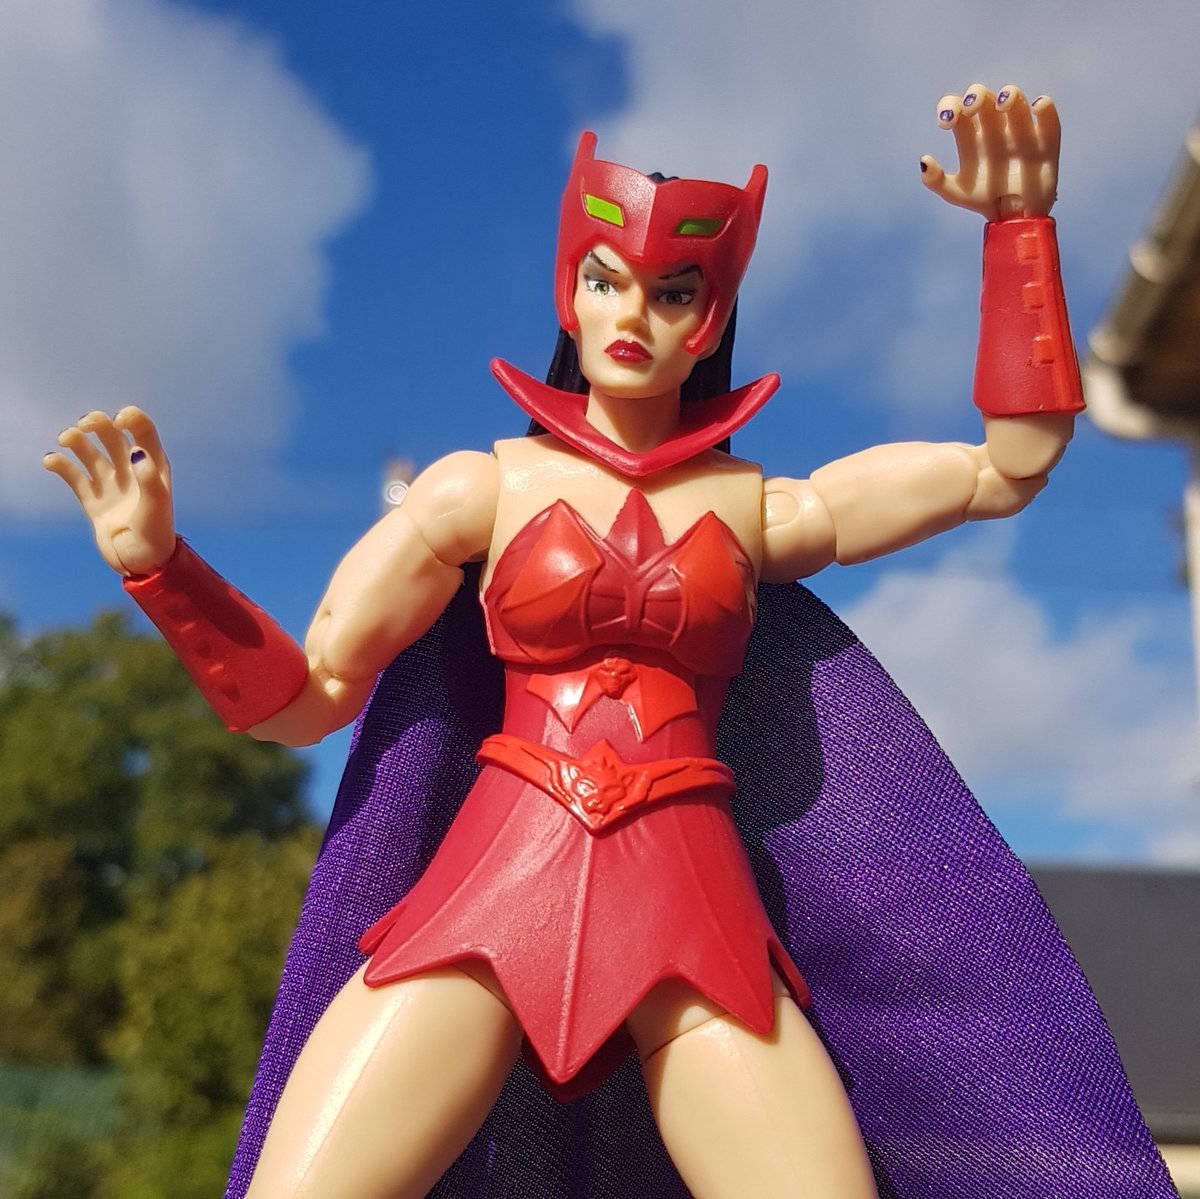 #dailyTFnFig 116
Brand: She-ra and the princesses of power #motu
Type: masterverse
Name: Catra
It's very different from her redesign yeah 😭 (i prefer the new catra). I do like the mask and big horde logo